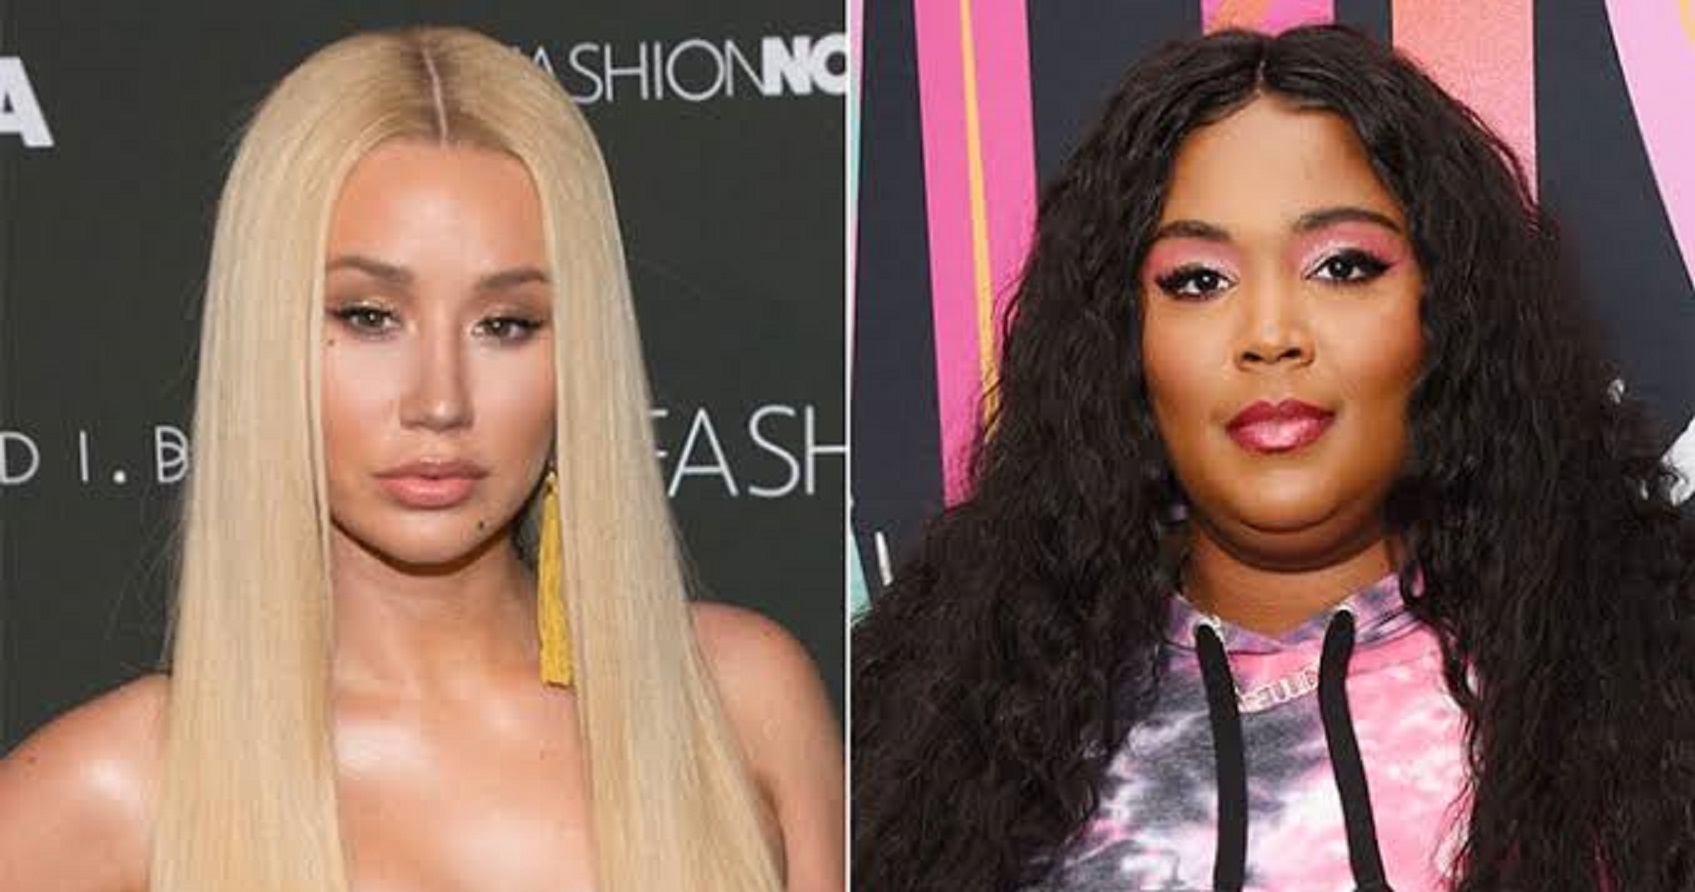 Lizzo Finally Ties With Iggy For ‘Longest Female #1 Rap Song’, After Jumping Back to the Top with ‘Truth Hurts’